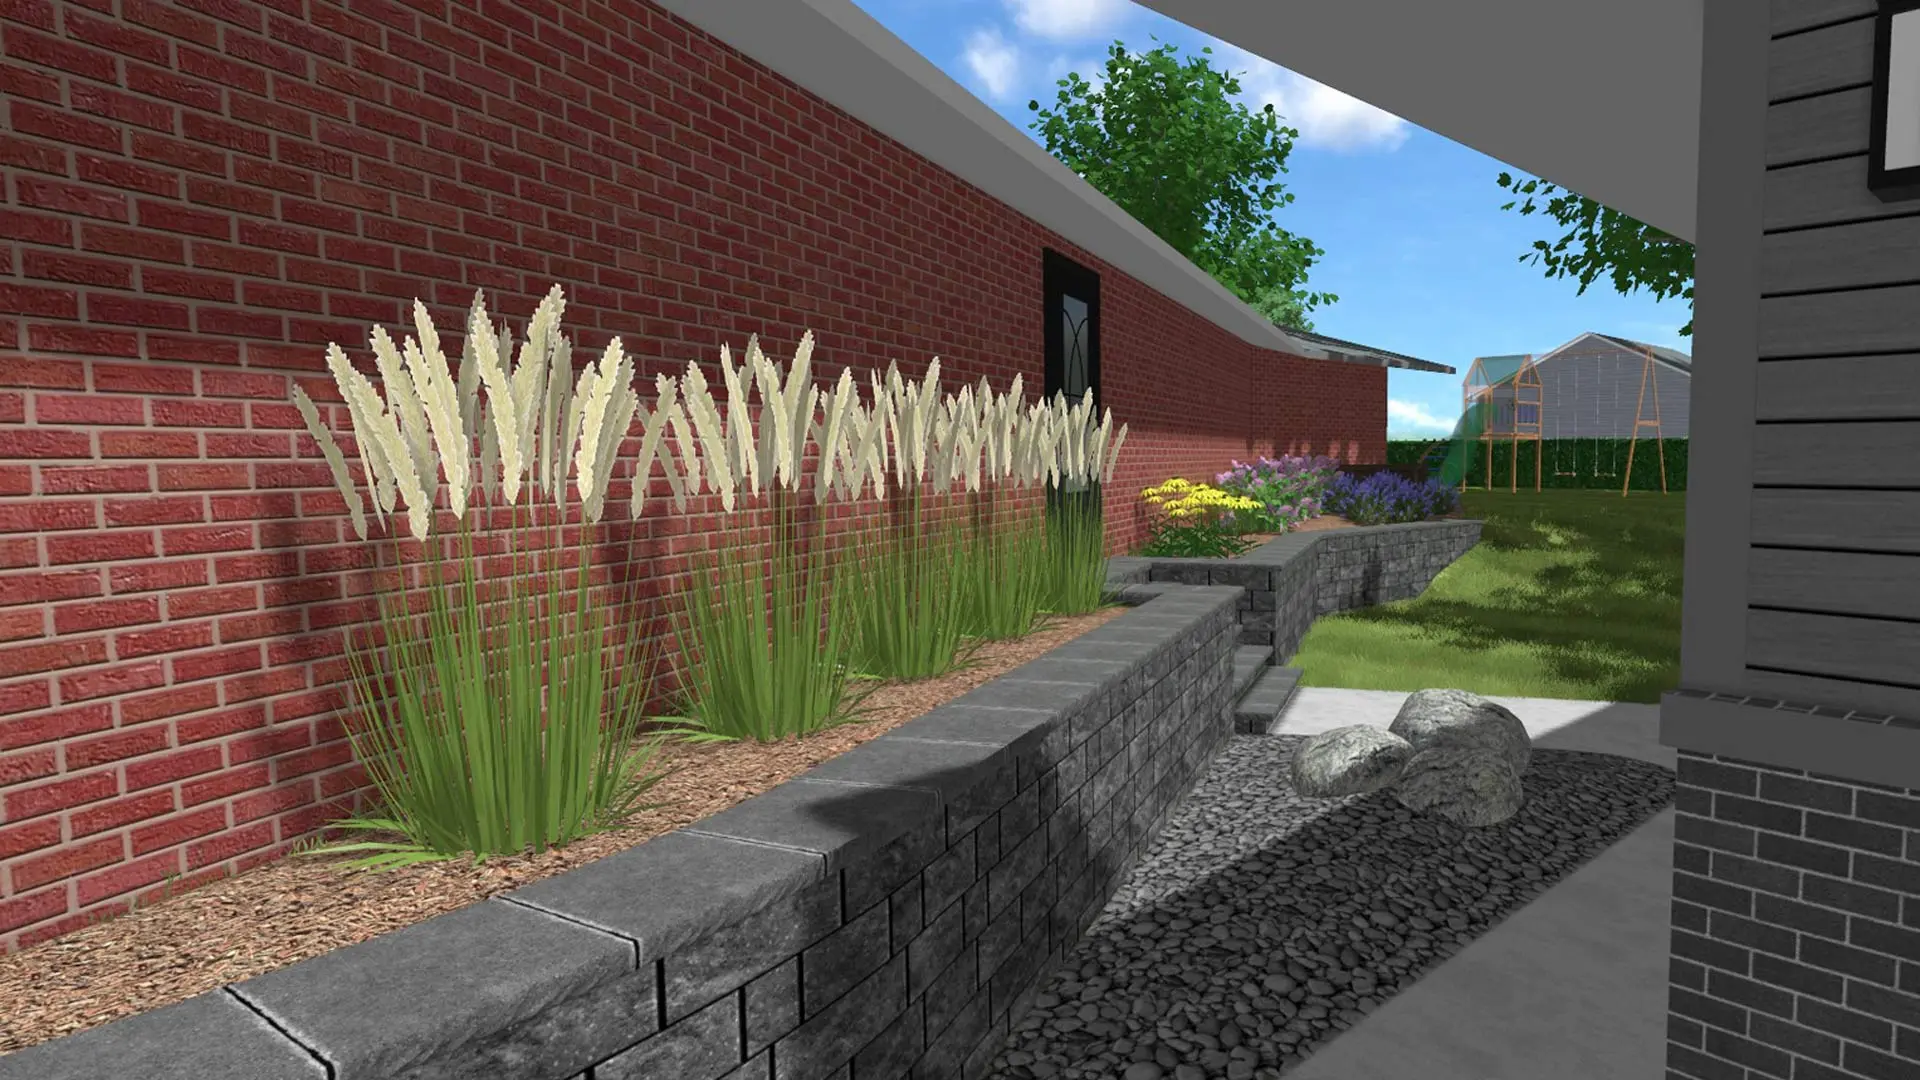 Design rendering of a retaining wall with plantings in Millard, NE.